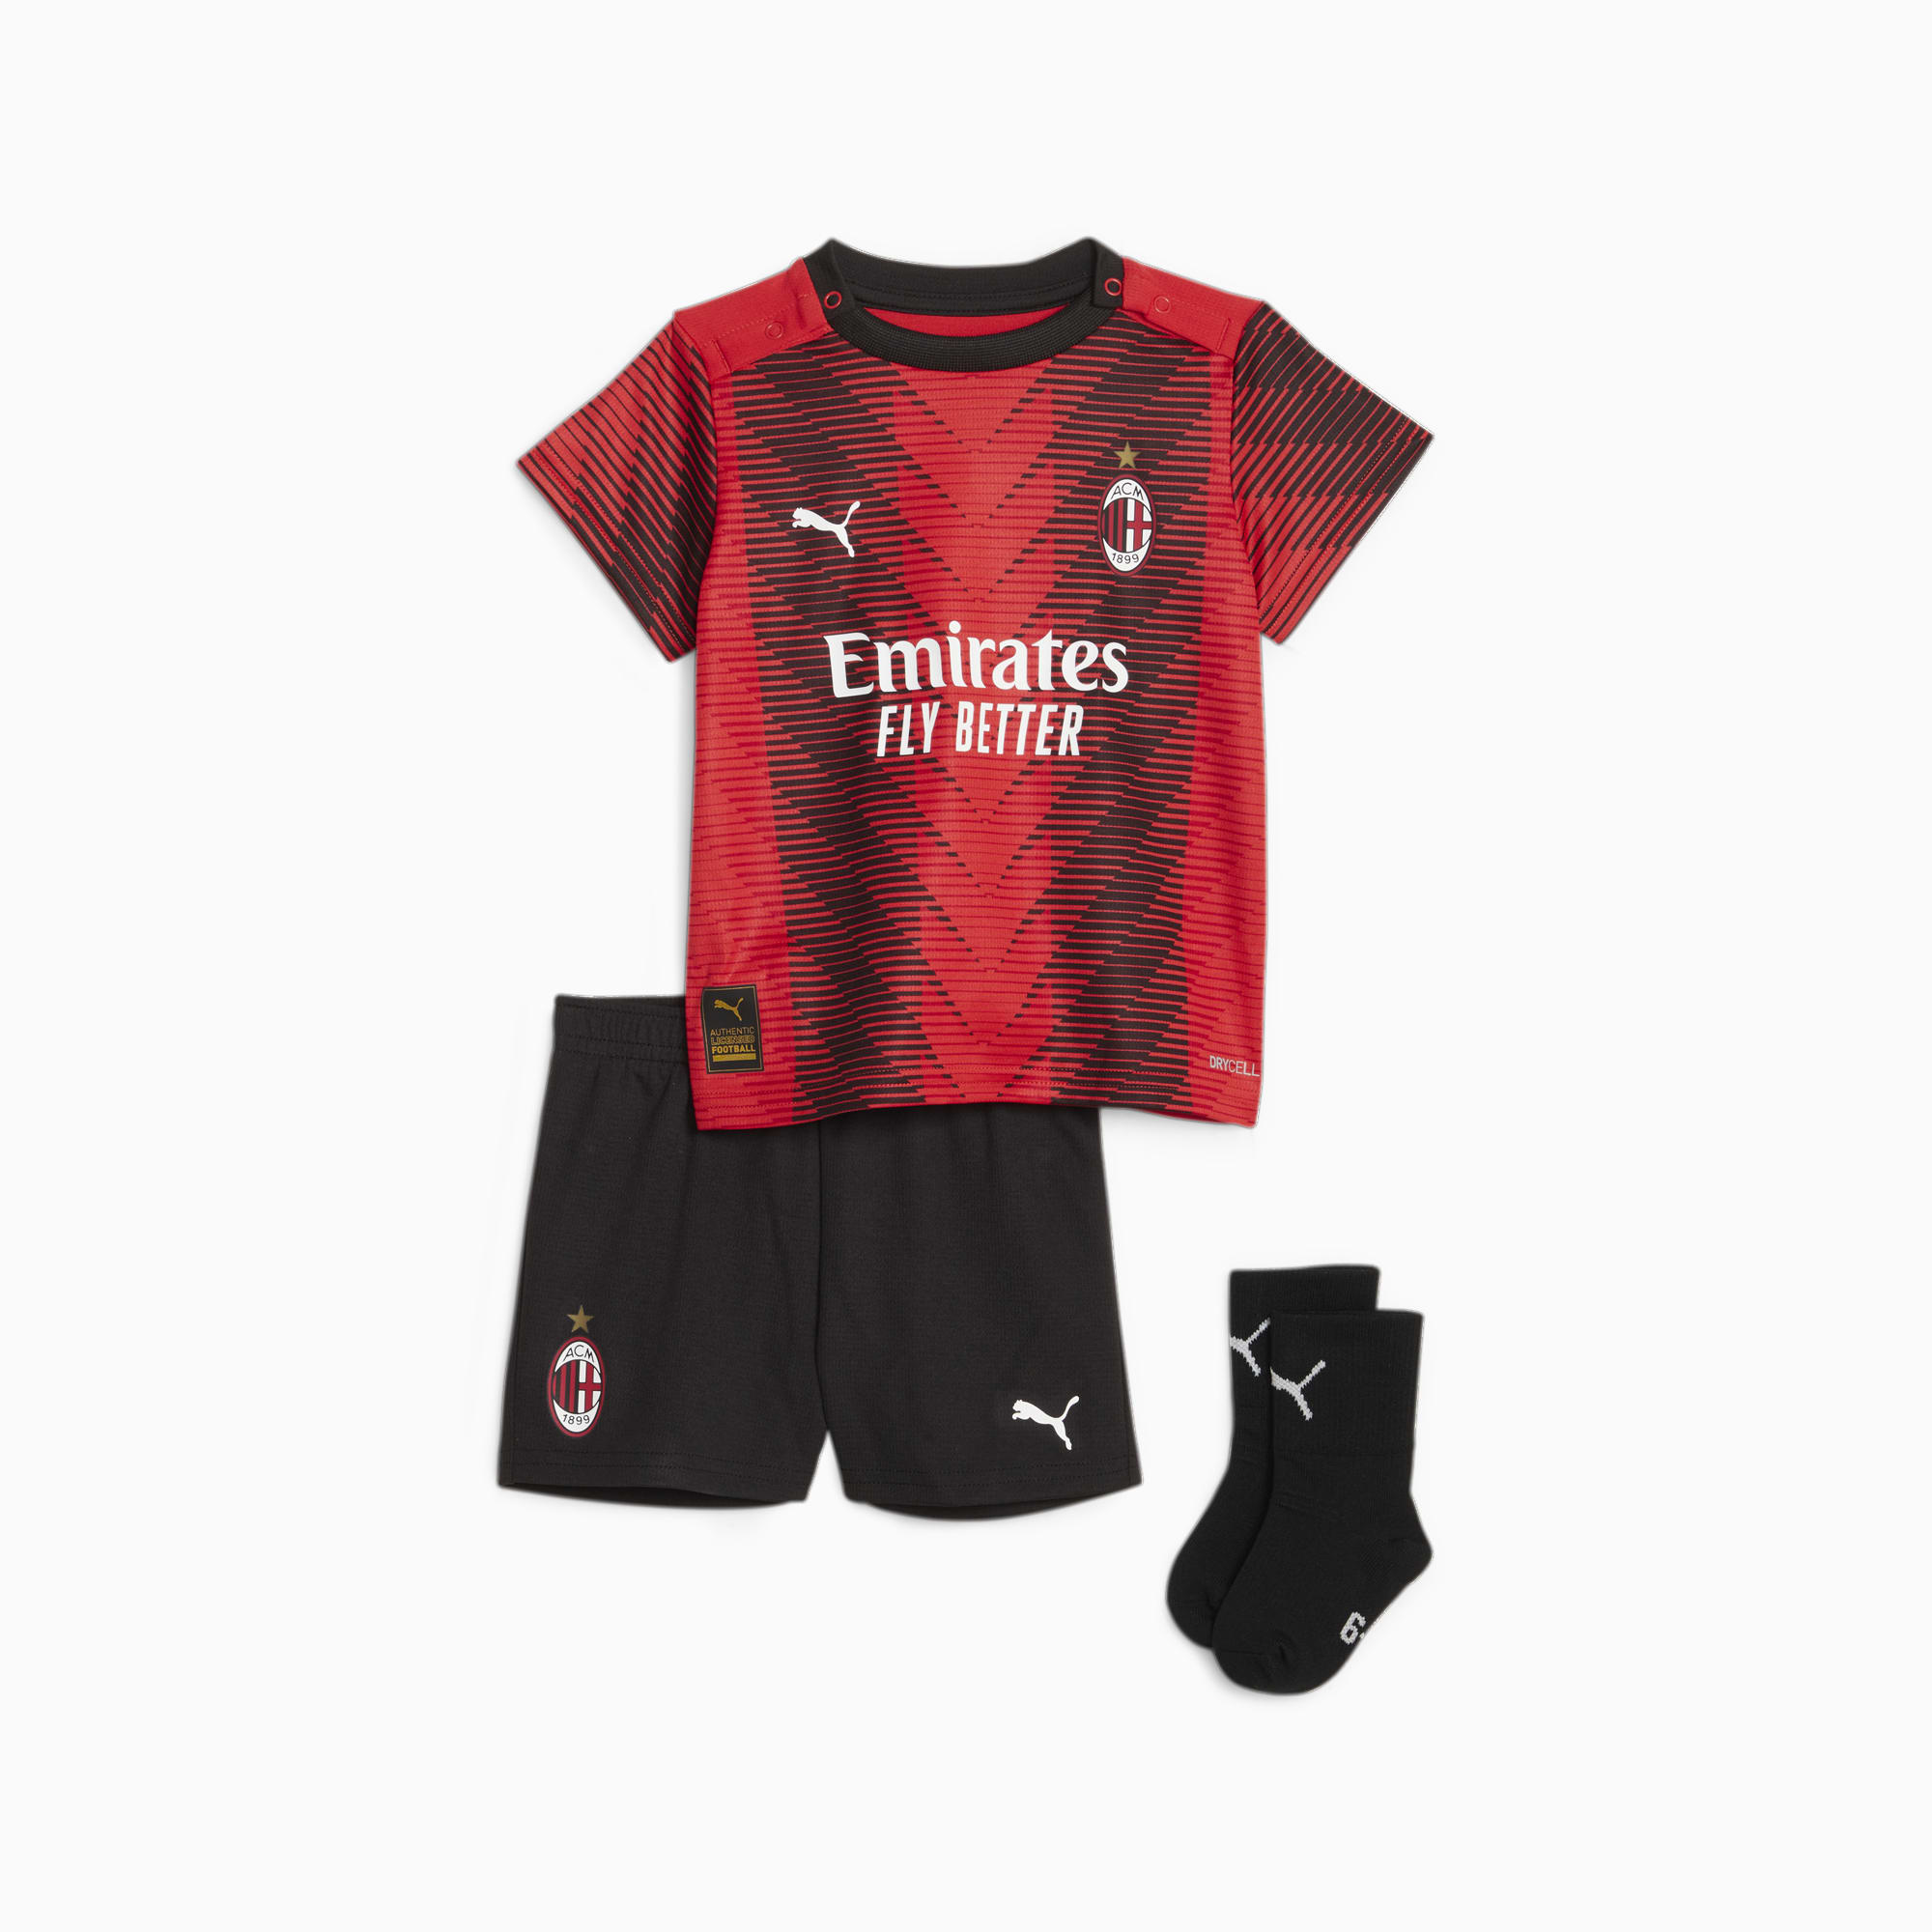 PUMA A.C. Milan 23/24 Home Baby Kit, For All Time Red/Black, Size 92, Clothing